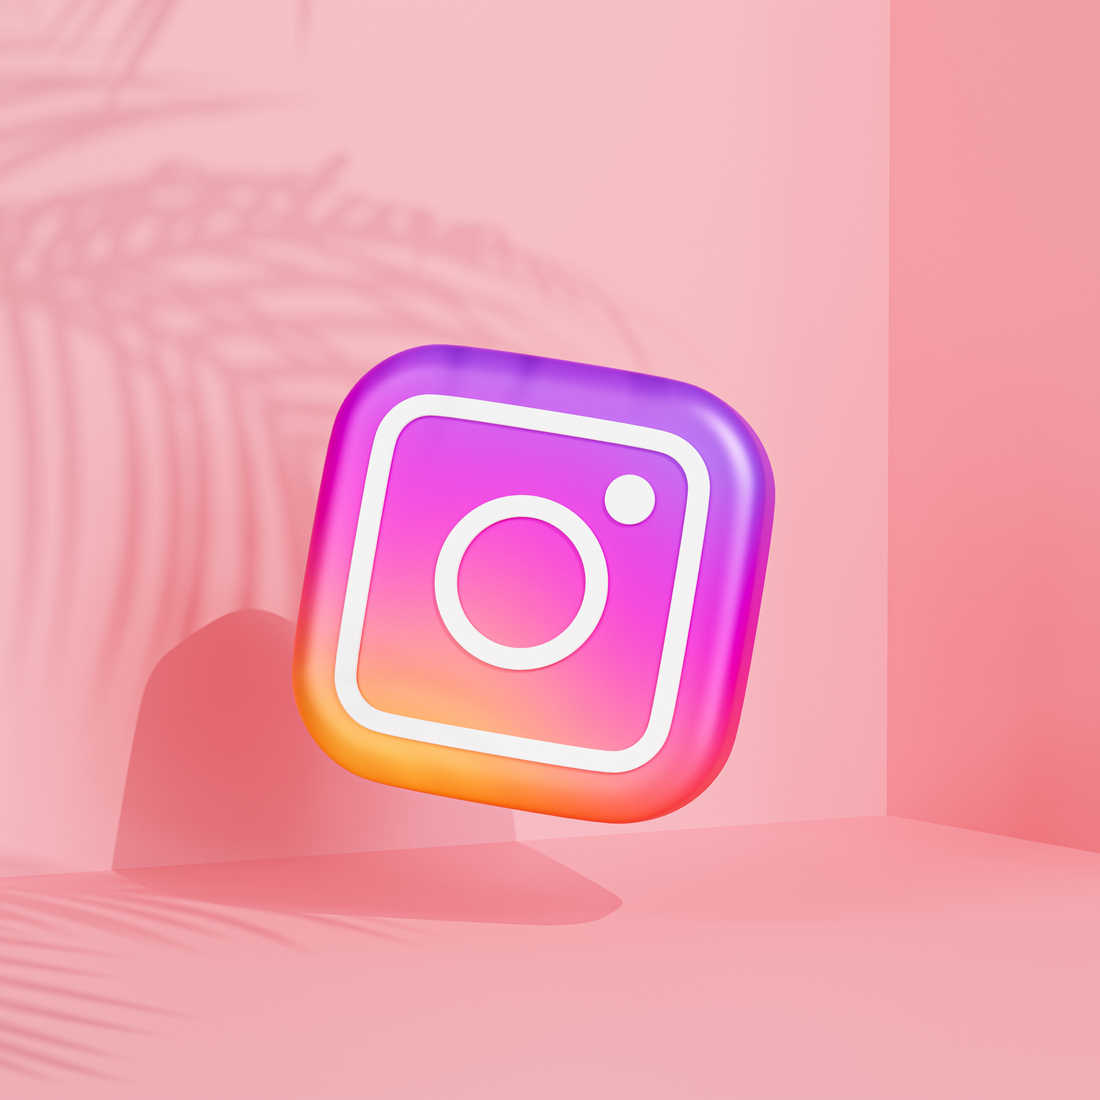 Why You Should Use Instagram Marketing Agency to Manage Your Instagram Account and Contents